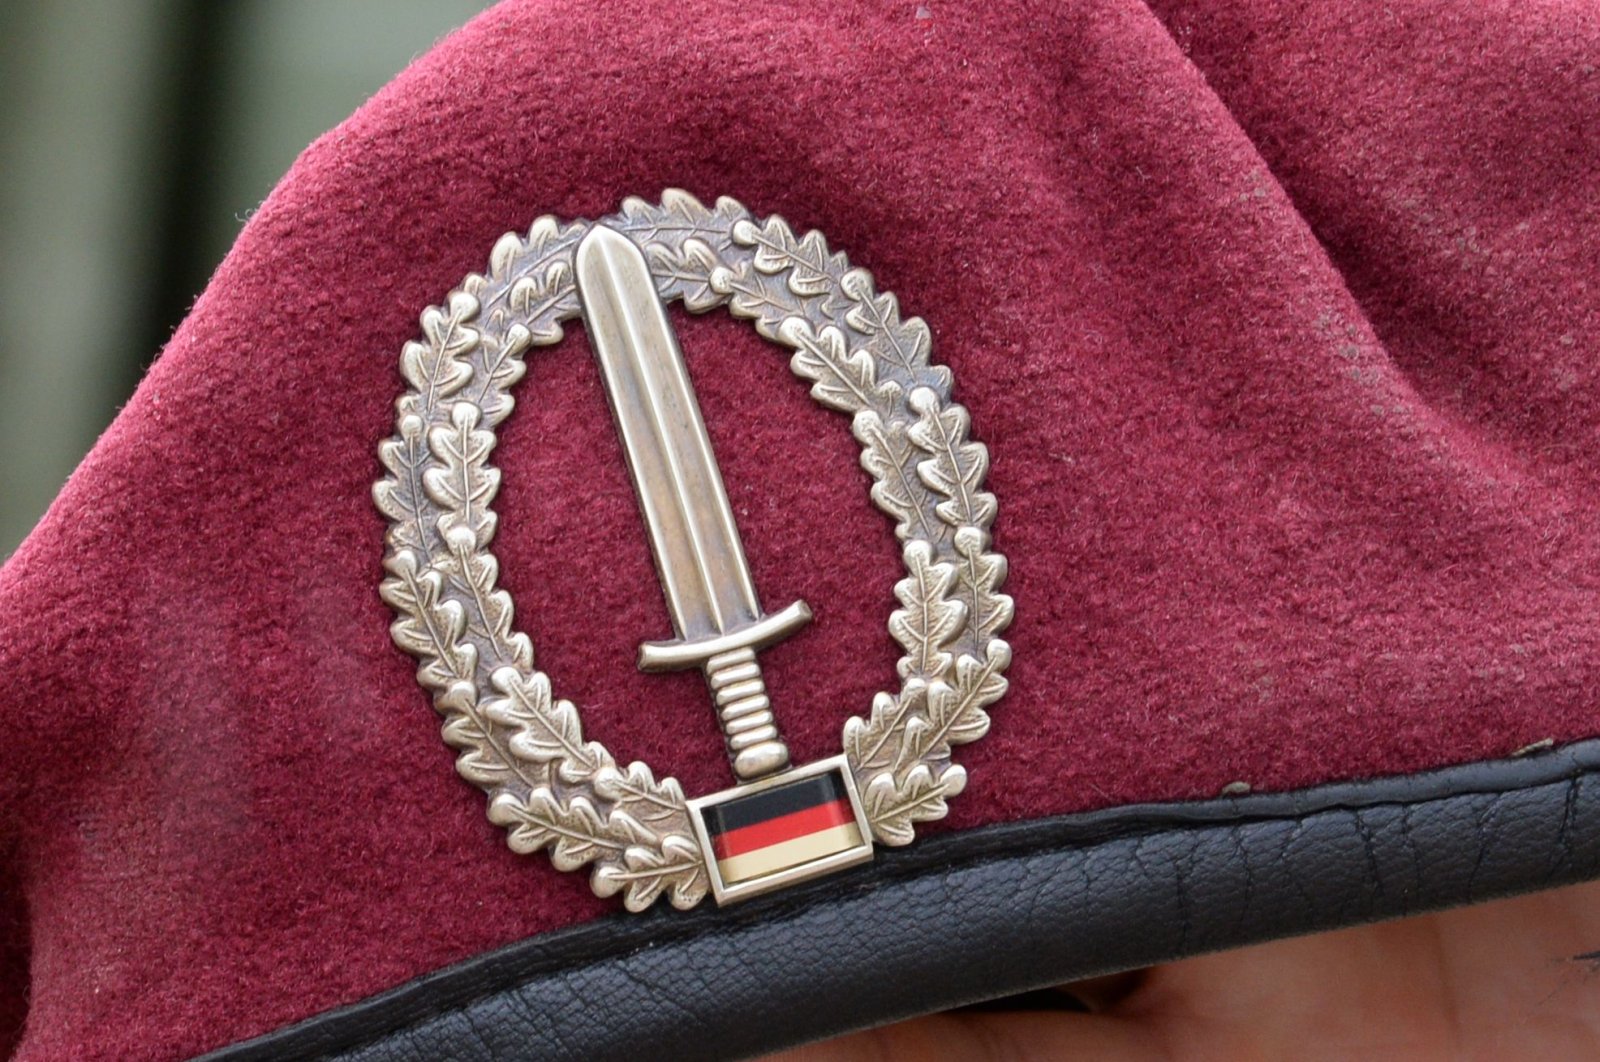 Picture taken on July 14, 2014 shows the emblem of the KSK (Kommando Spezialkraefte) special unit of Germany's armed forces Bundeswehr seen on the beret of a soldier taking part in a military exercise in Calw near Sindelfingen, southern Germany. (AFP Photo)